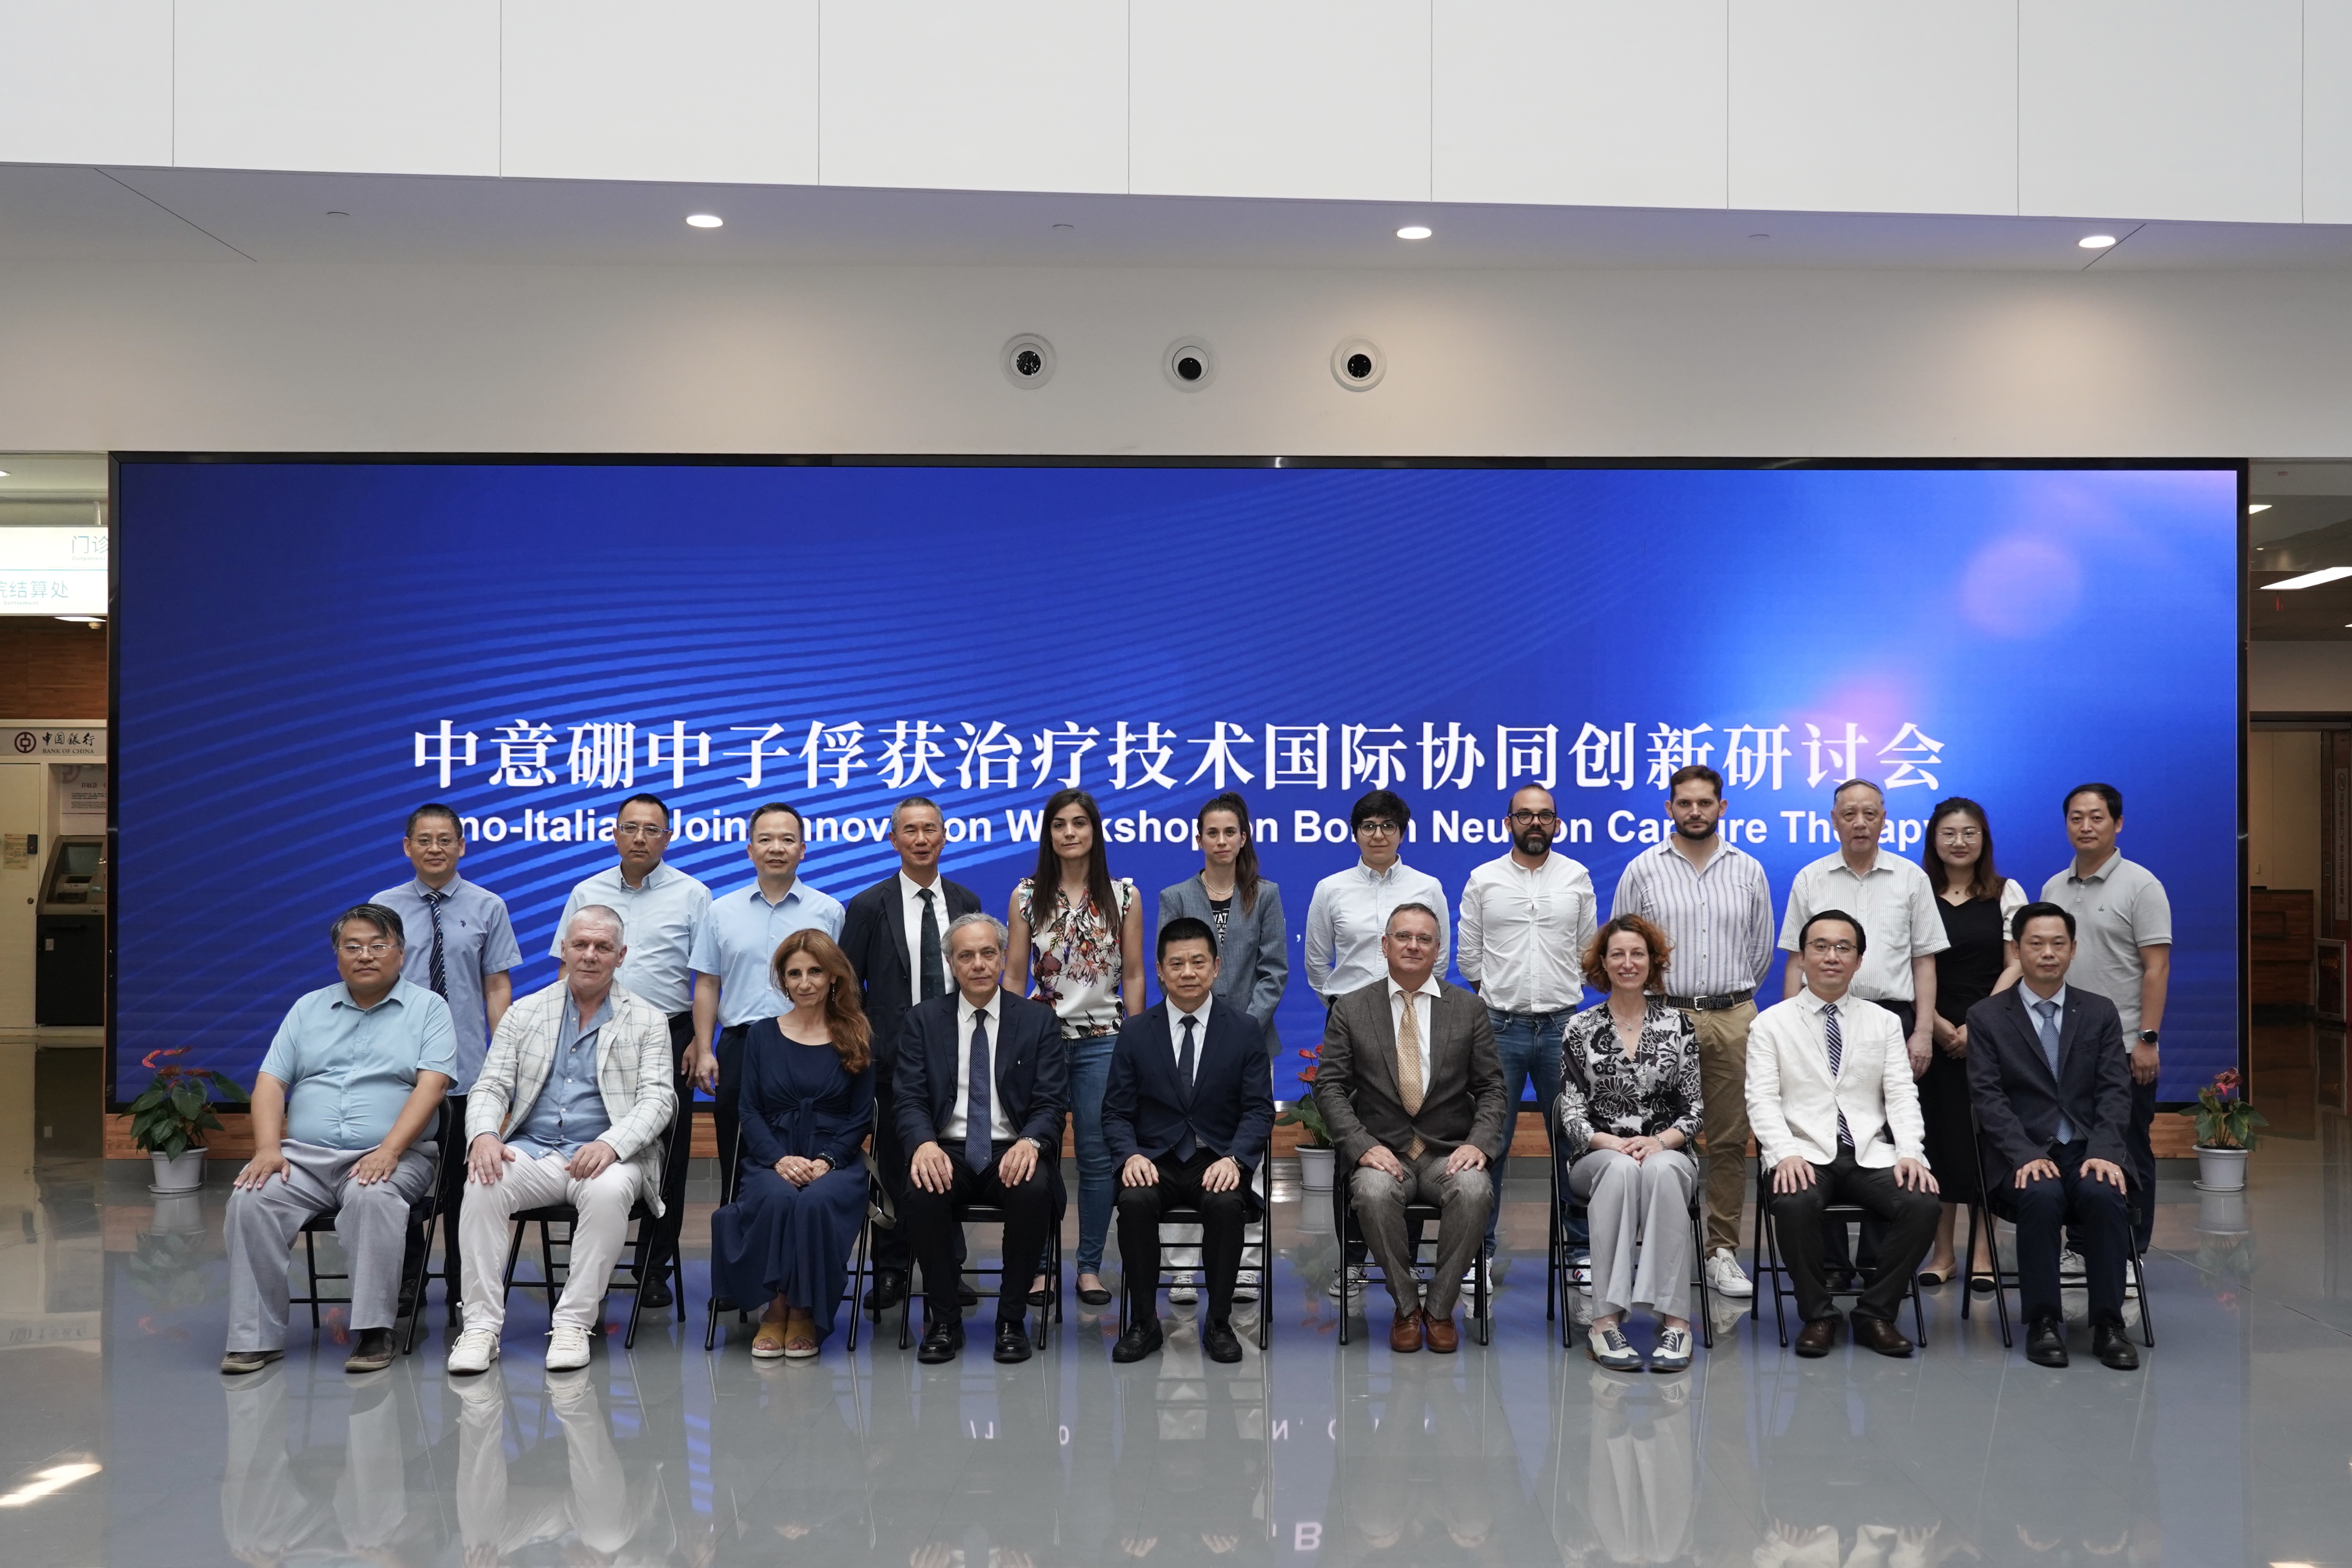 Sino-Italian BNCT Workshop Staged to Bolster Collaboration in Boron Neutron Capture Therapy (BNCT)